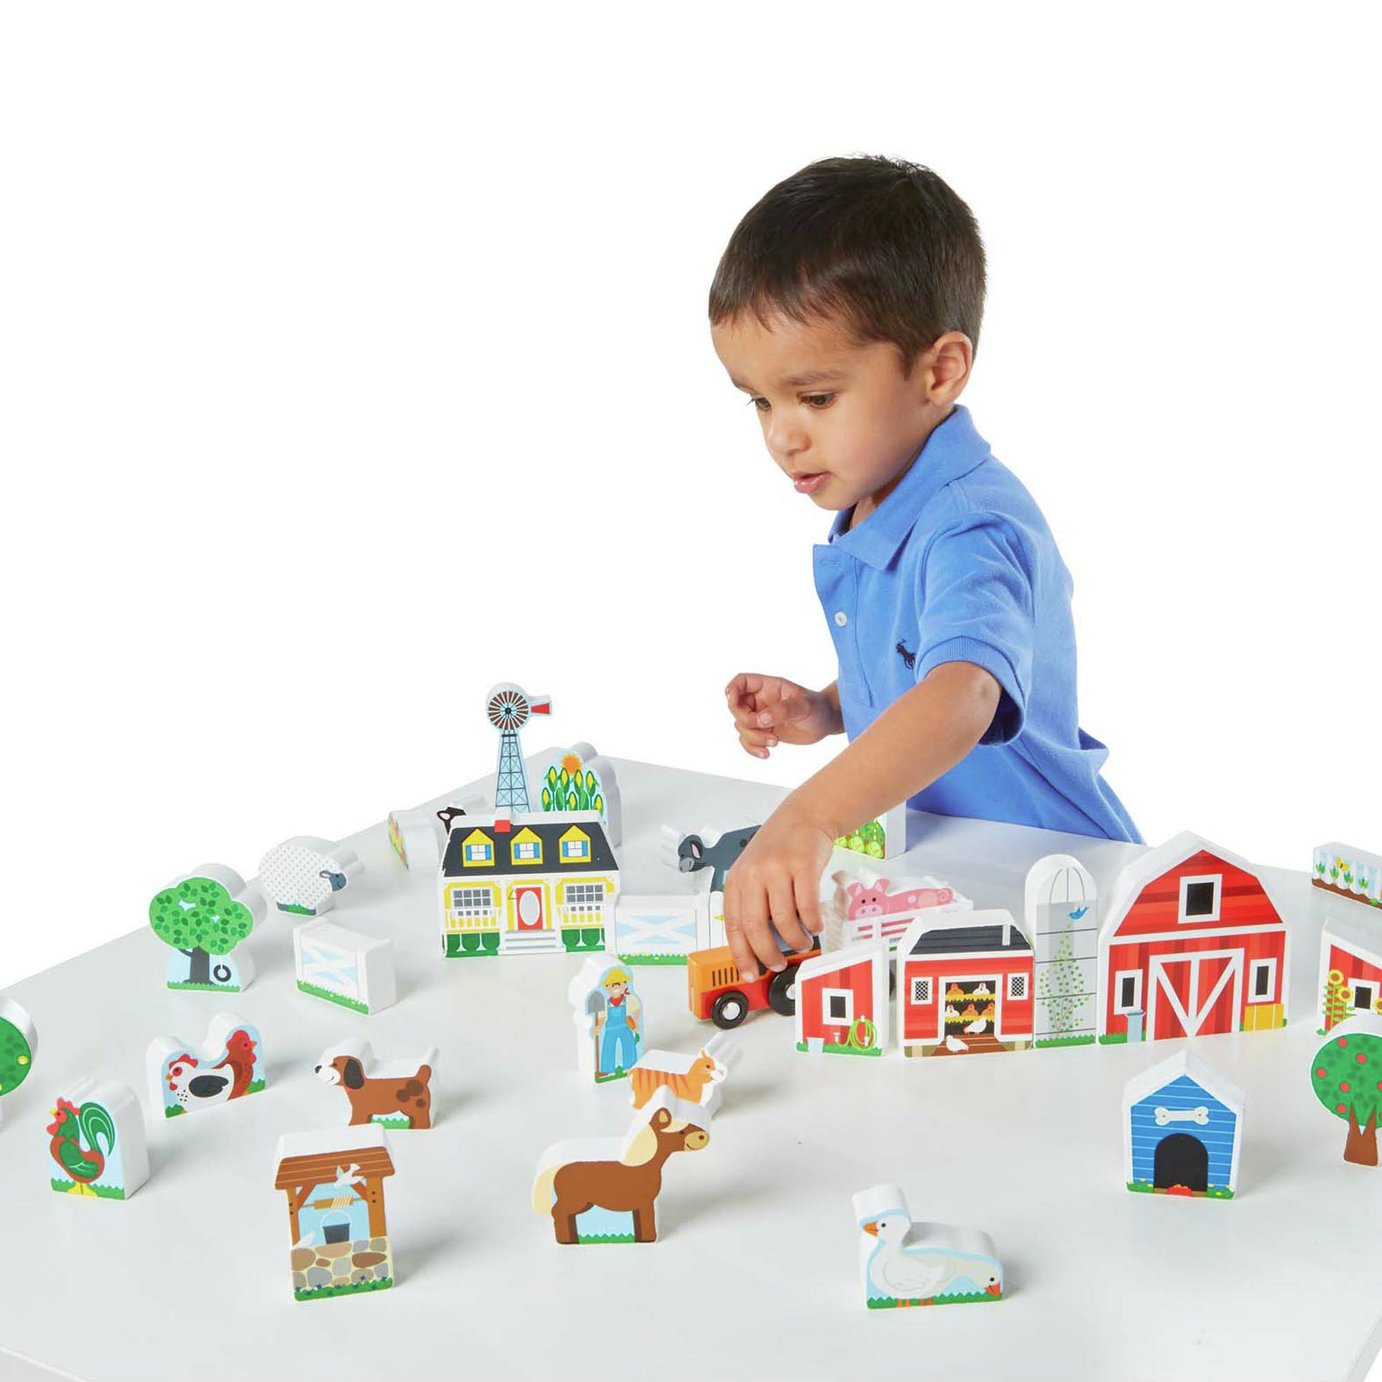 Melissa and Doug Wooden Farm and Tractor Playset Review